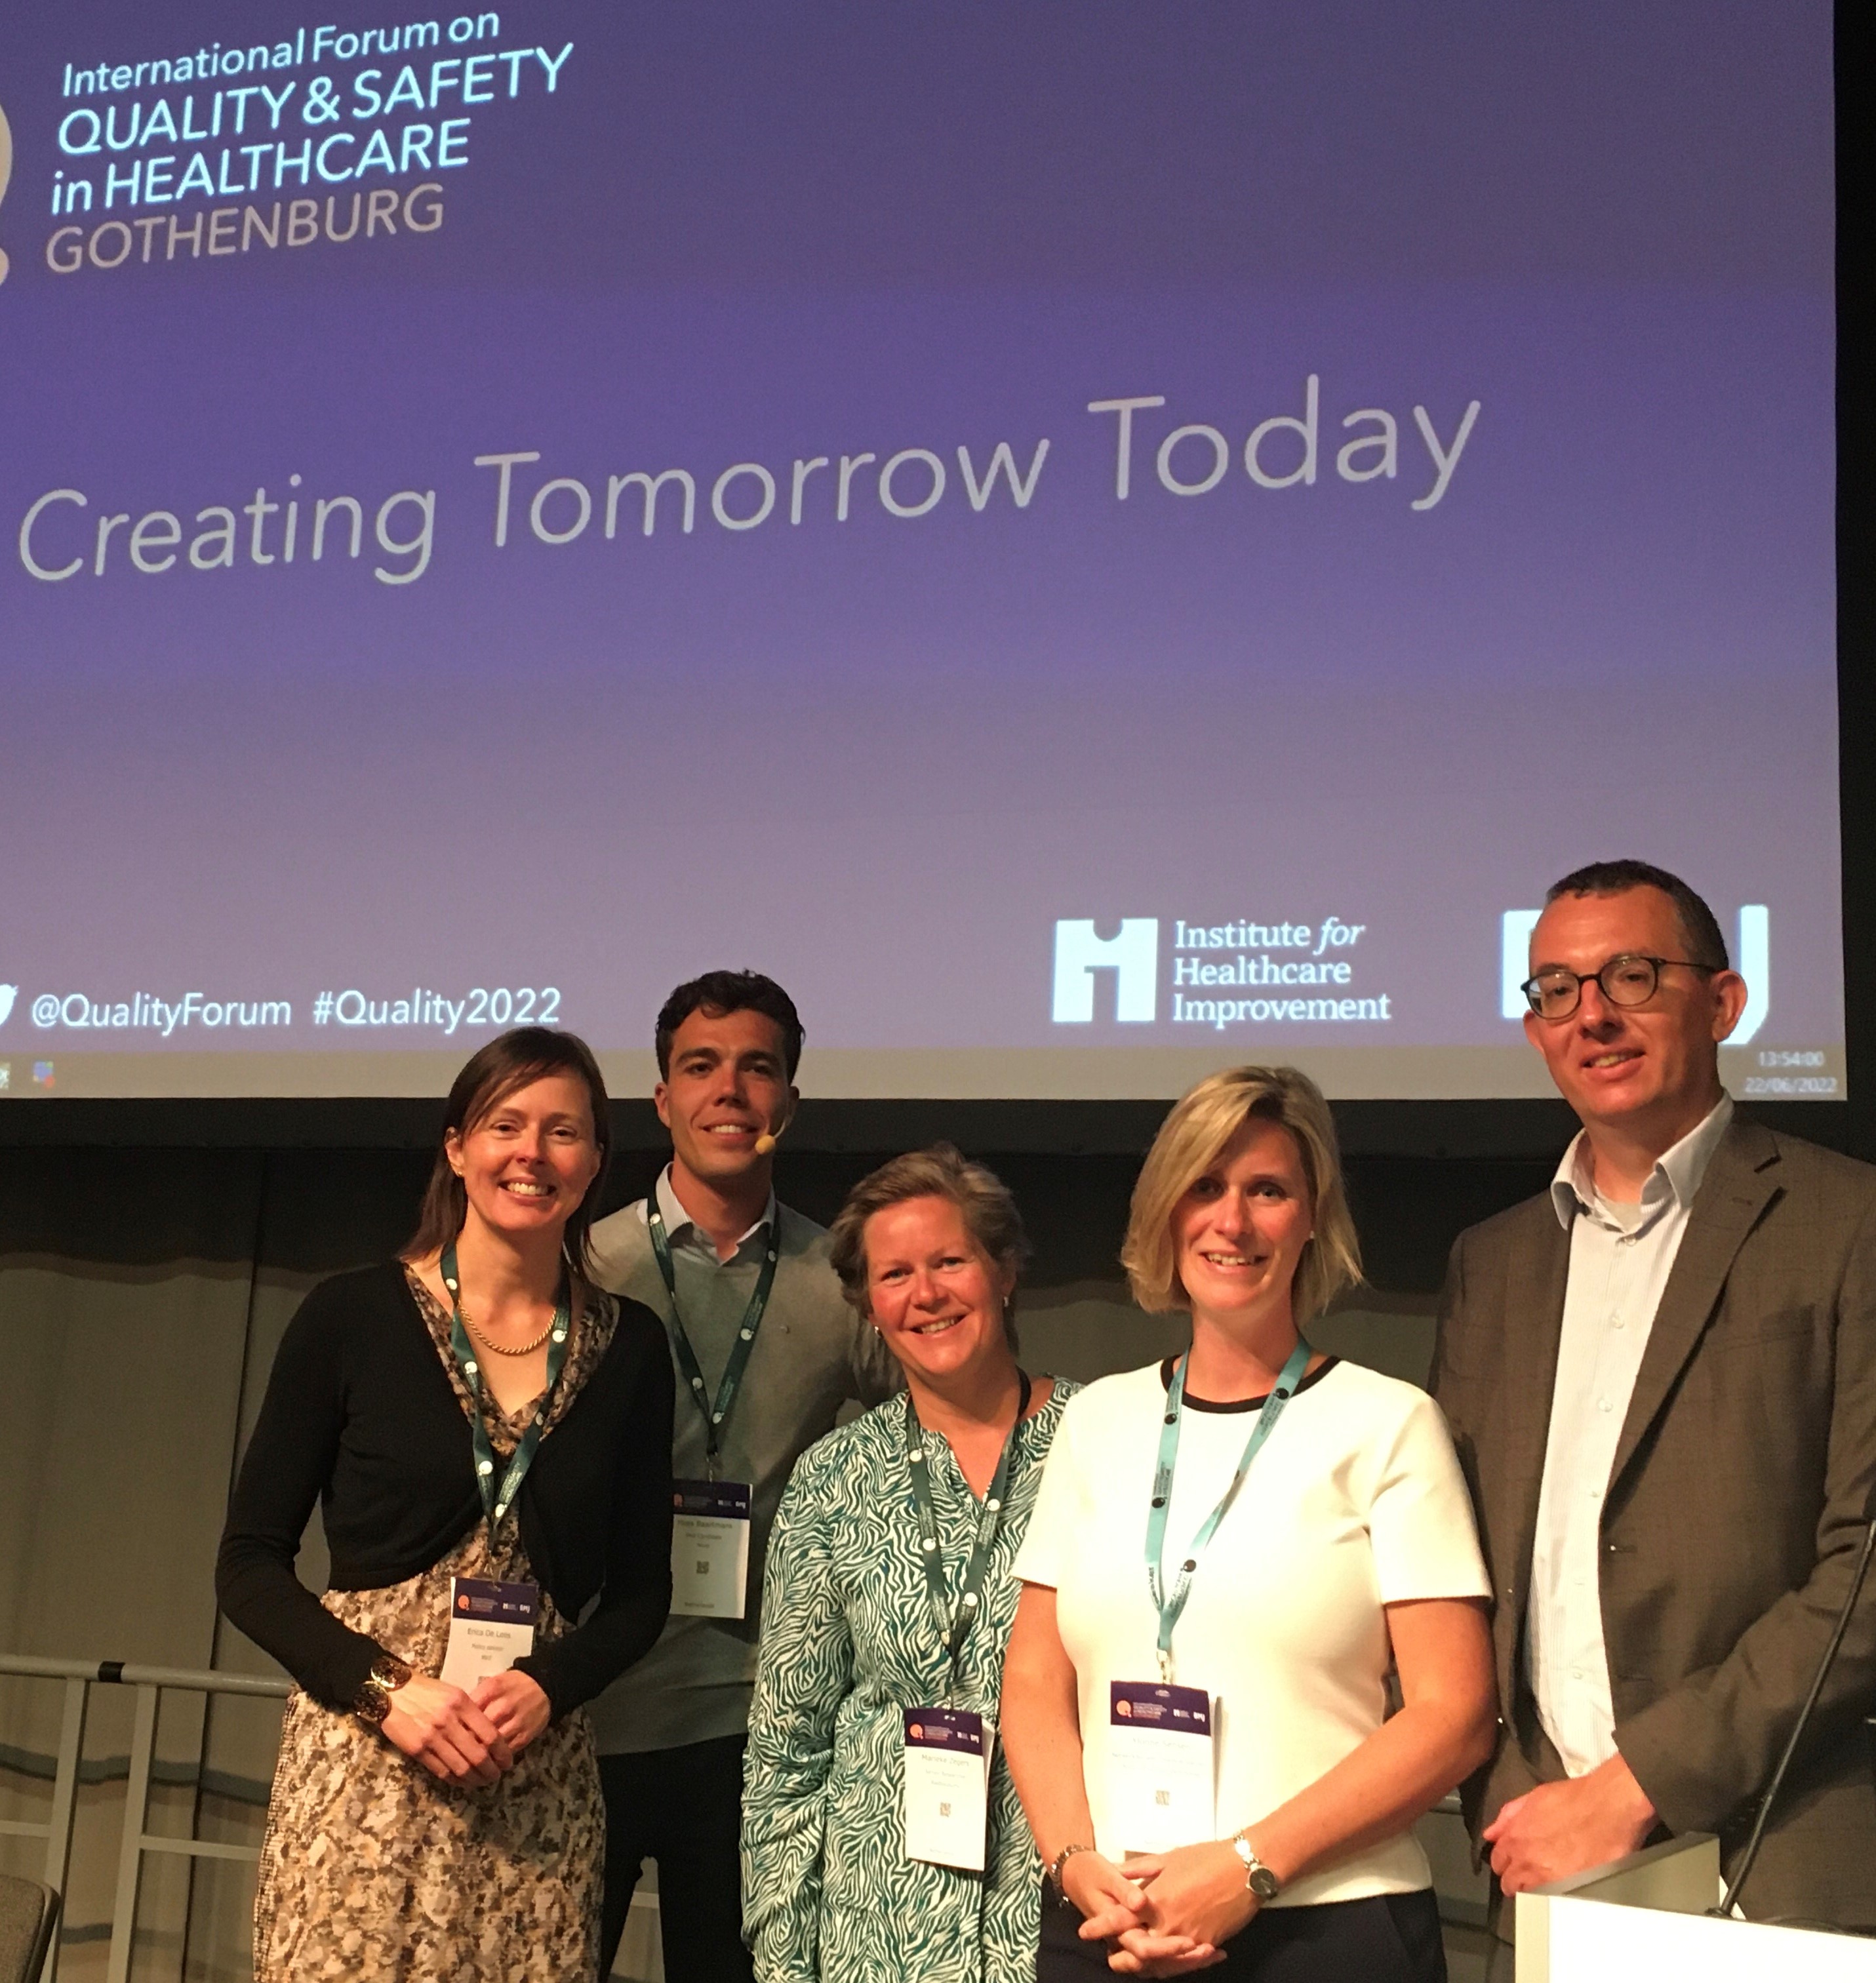 NVZledenkorting BMJ Int. Forum on Quality & Safety in healthcare